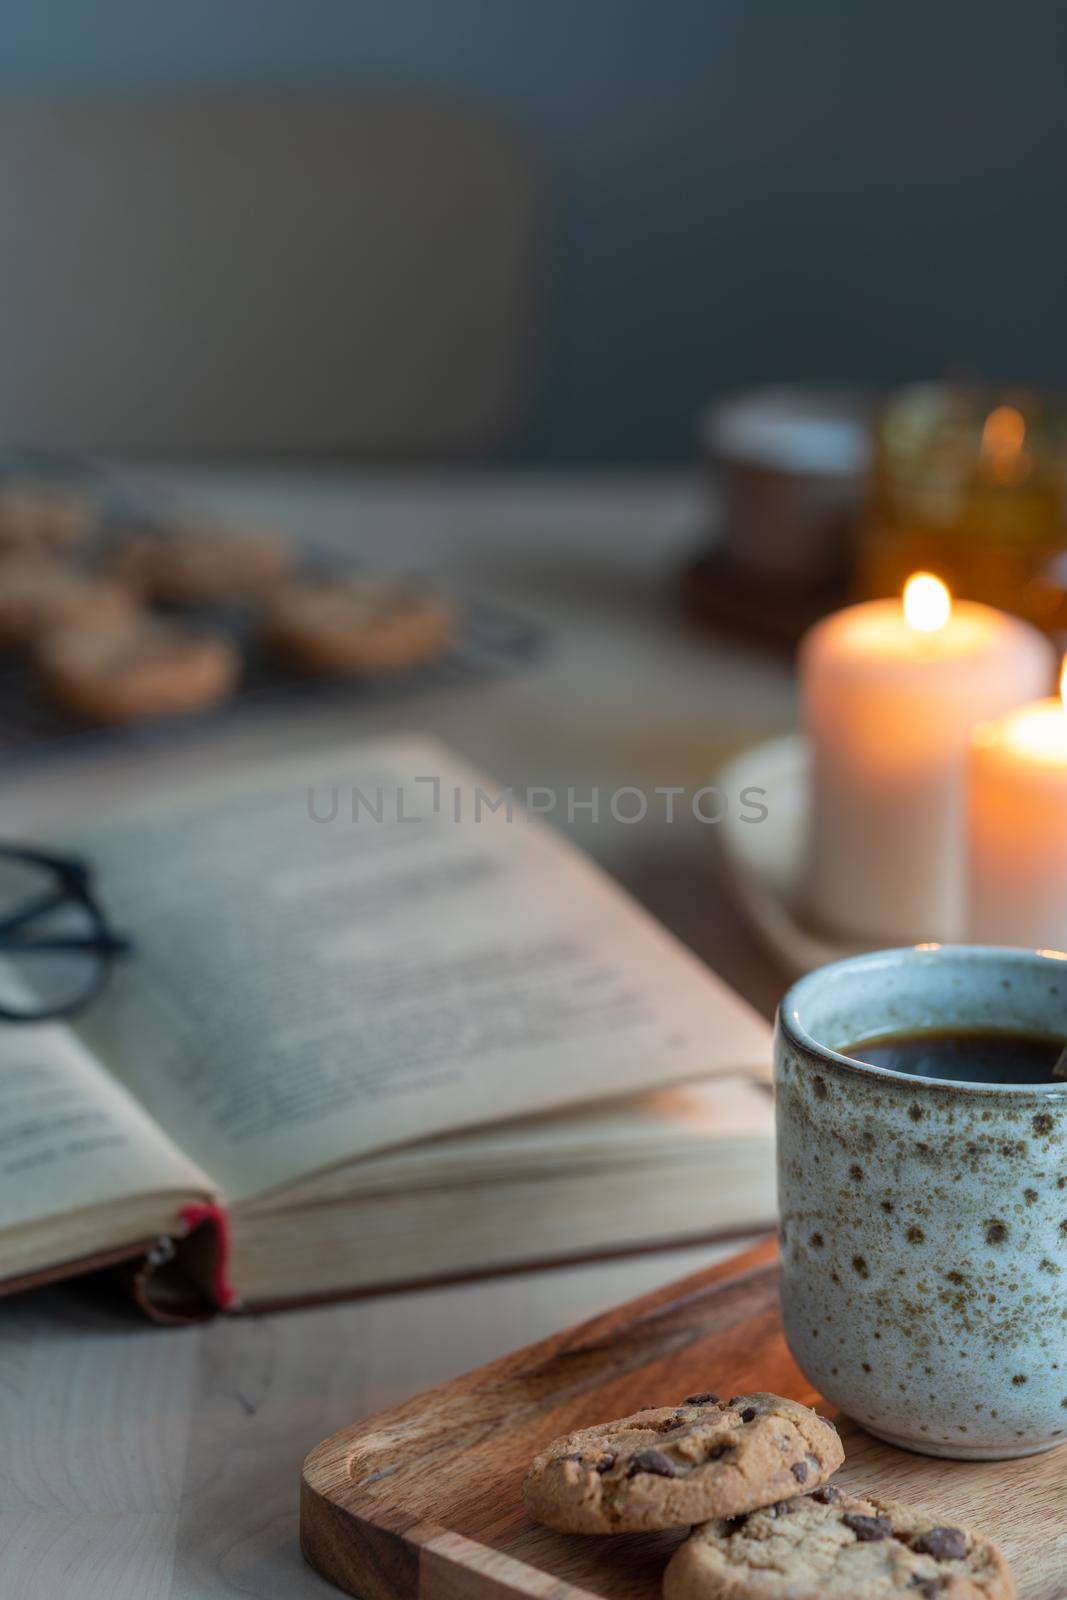 Reading book on cozy winter evening with candles, tea and cookies. Side view, vertical